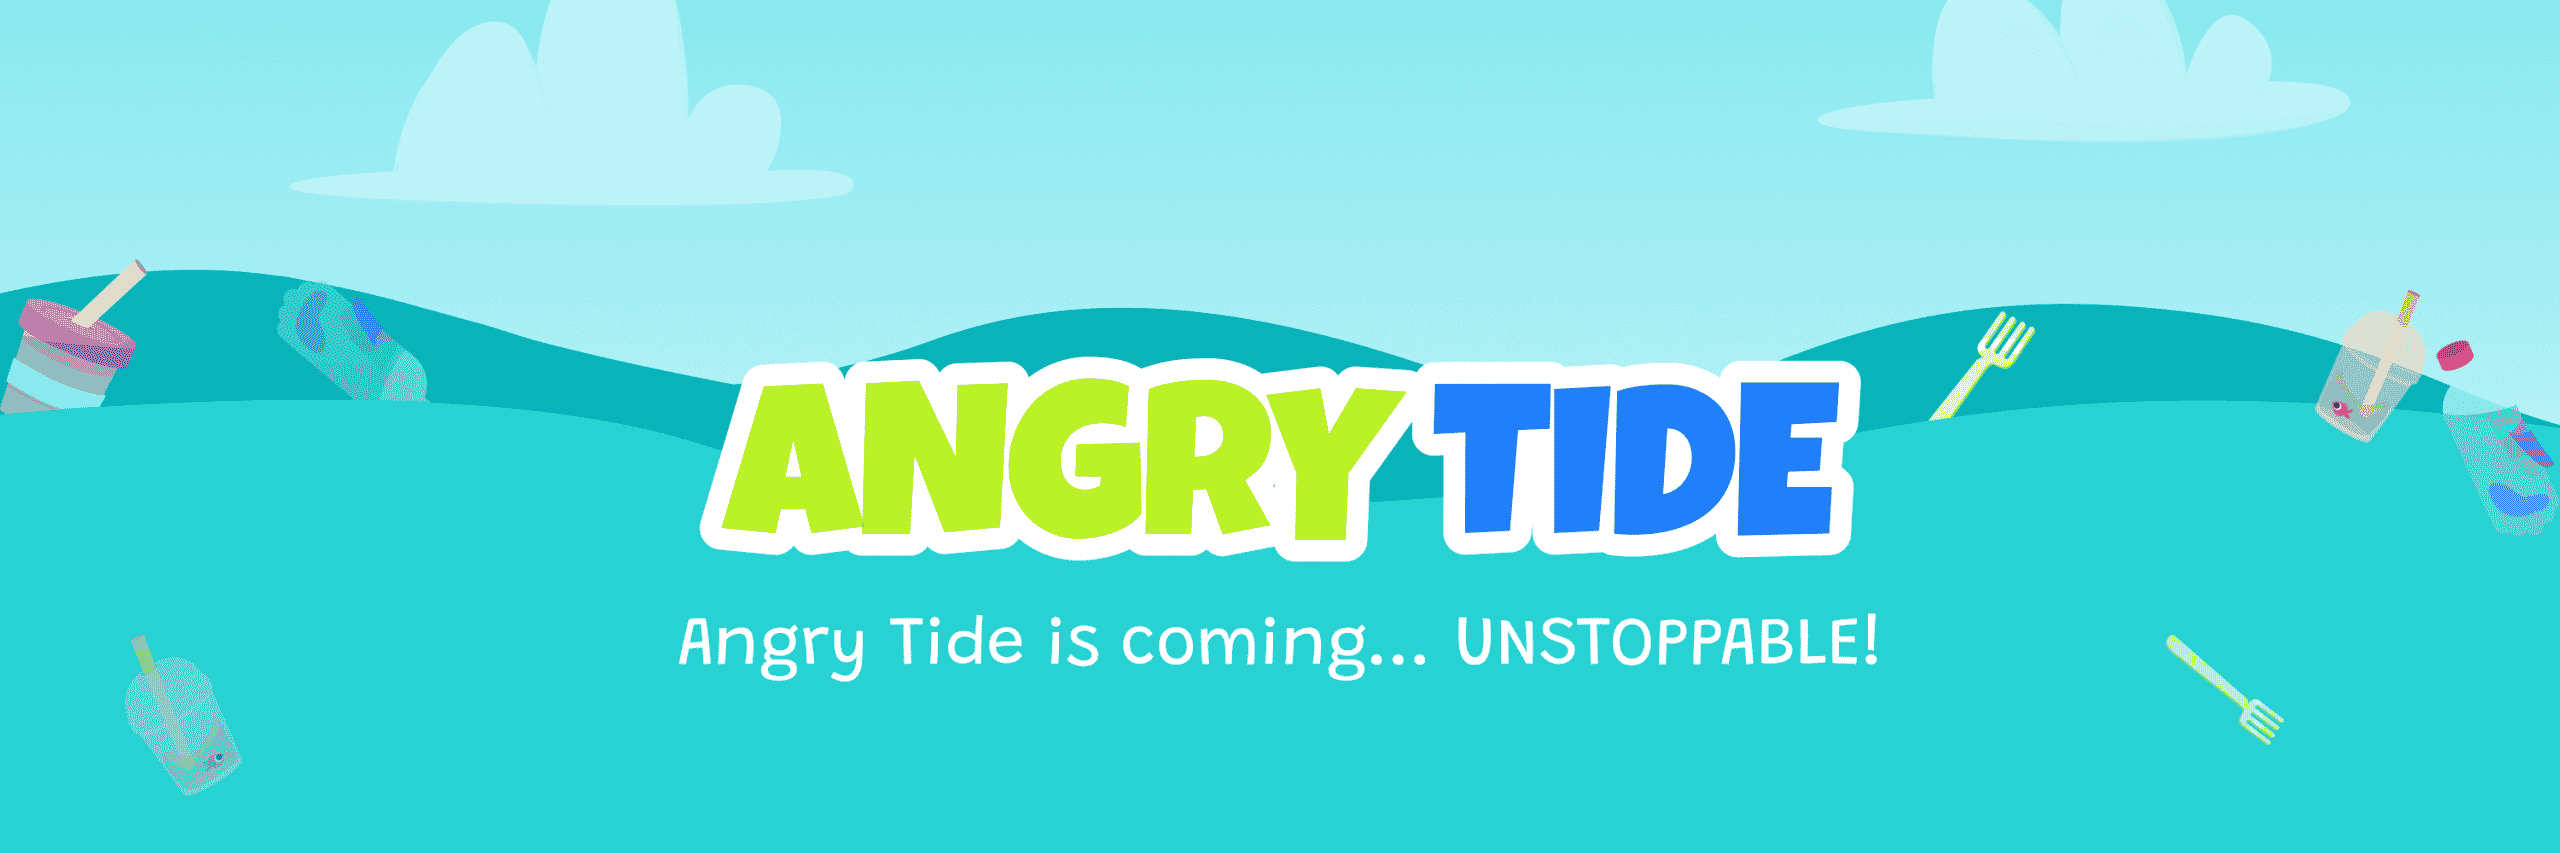 Digital poster of the Angry Tides NFT collection's logo